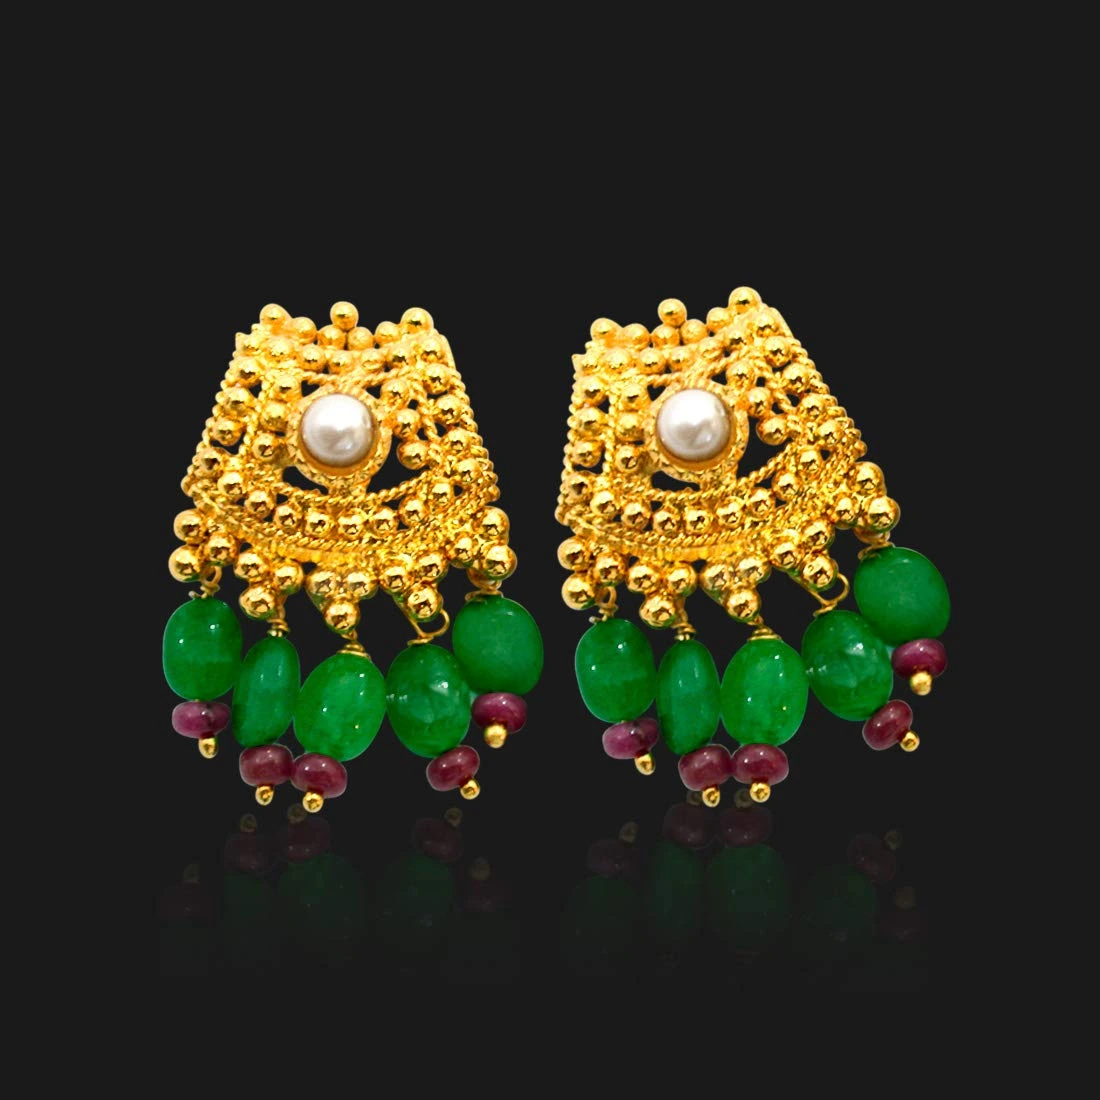 Real Freshwater Pearl, Ruby, Emerald & Gold Plated Earrings for Women (SE107)